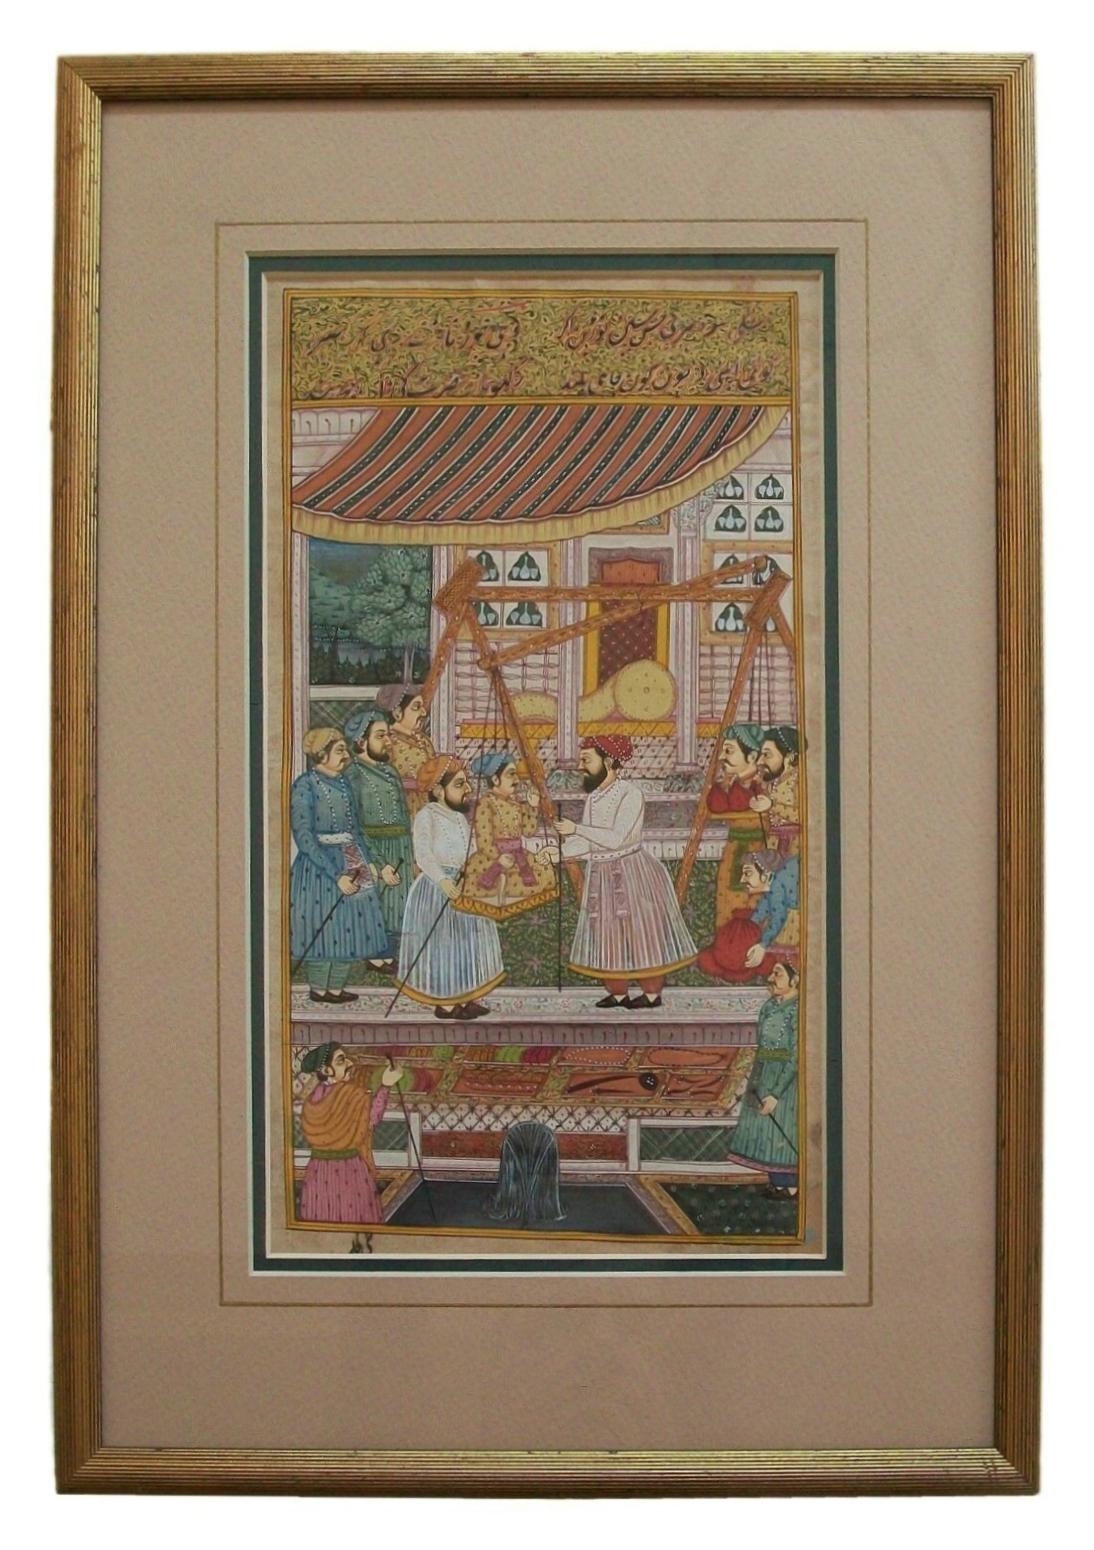 Anglo-Indian Mughal Style Miniature Court Scene Painting - Framed - India - 20th Century For Sale